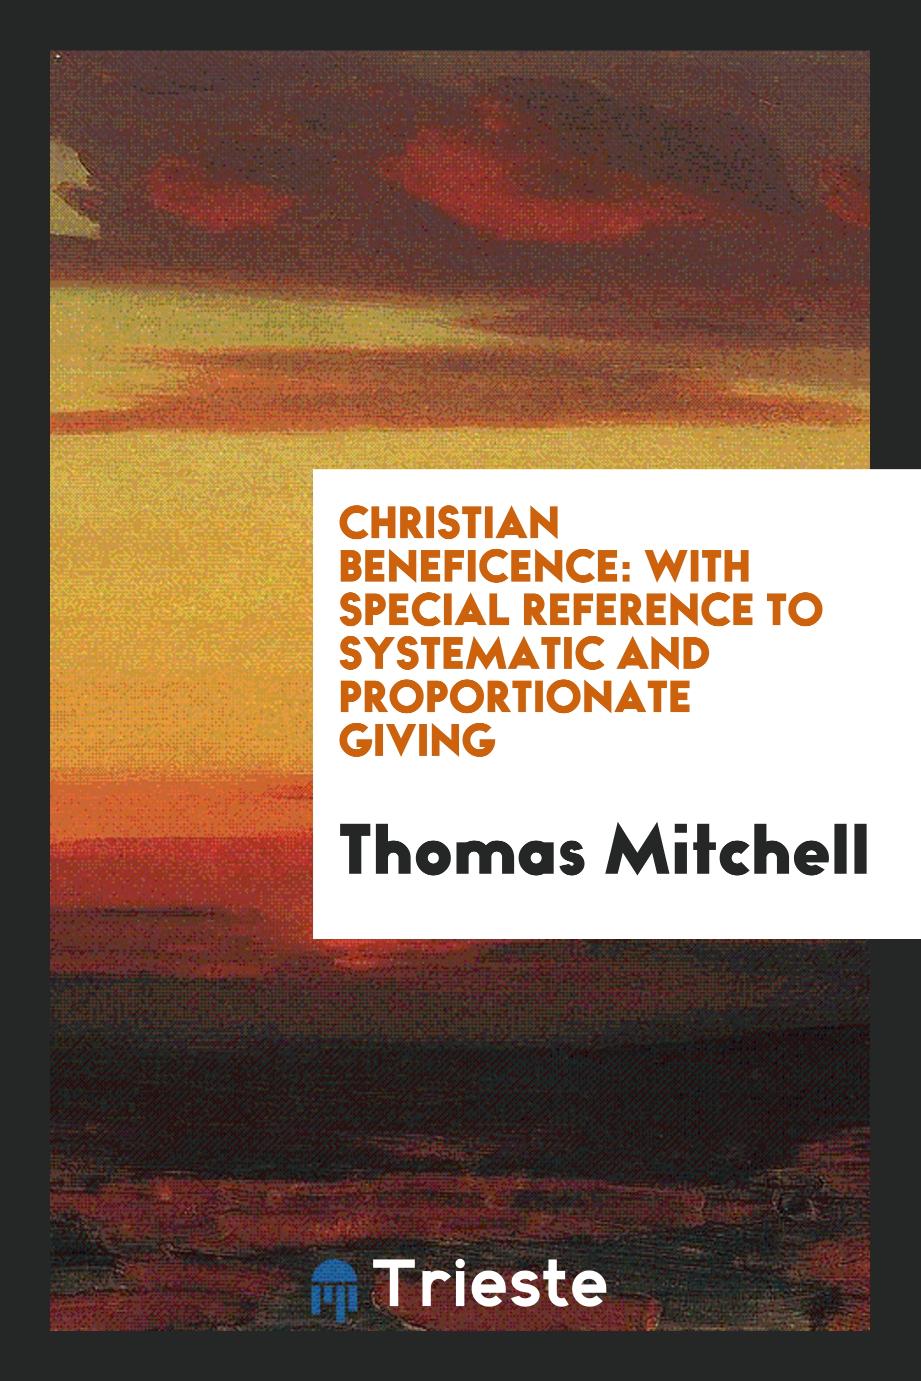 Christian beneficence: with special reference to systematic and proportionate giving